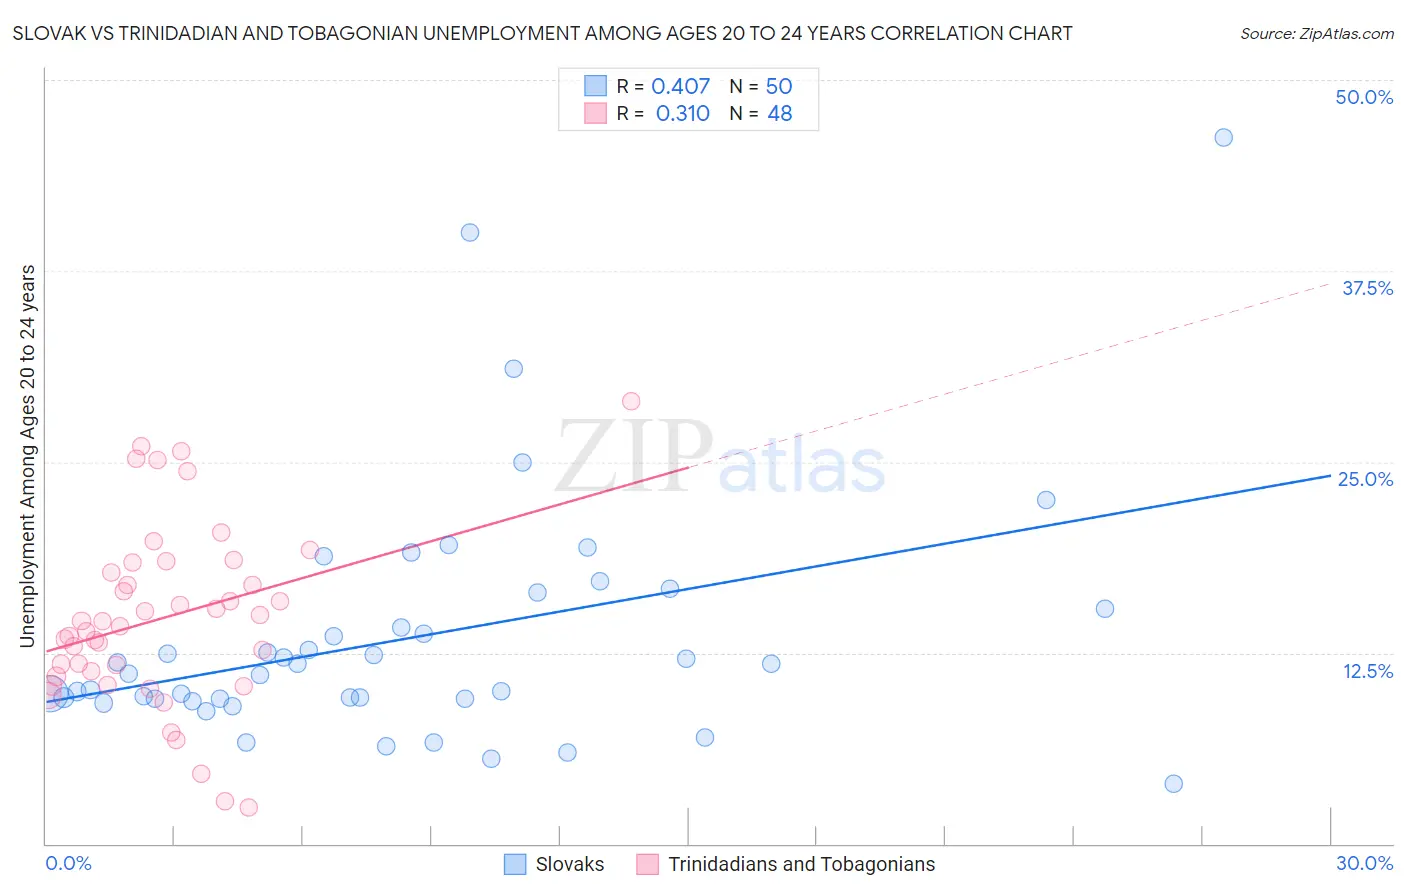 Slovak vs Trinidadian and Tobagonian Unemployment Among Ages 20 to 24 years